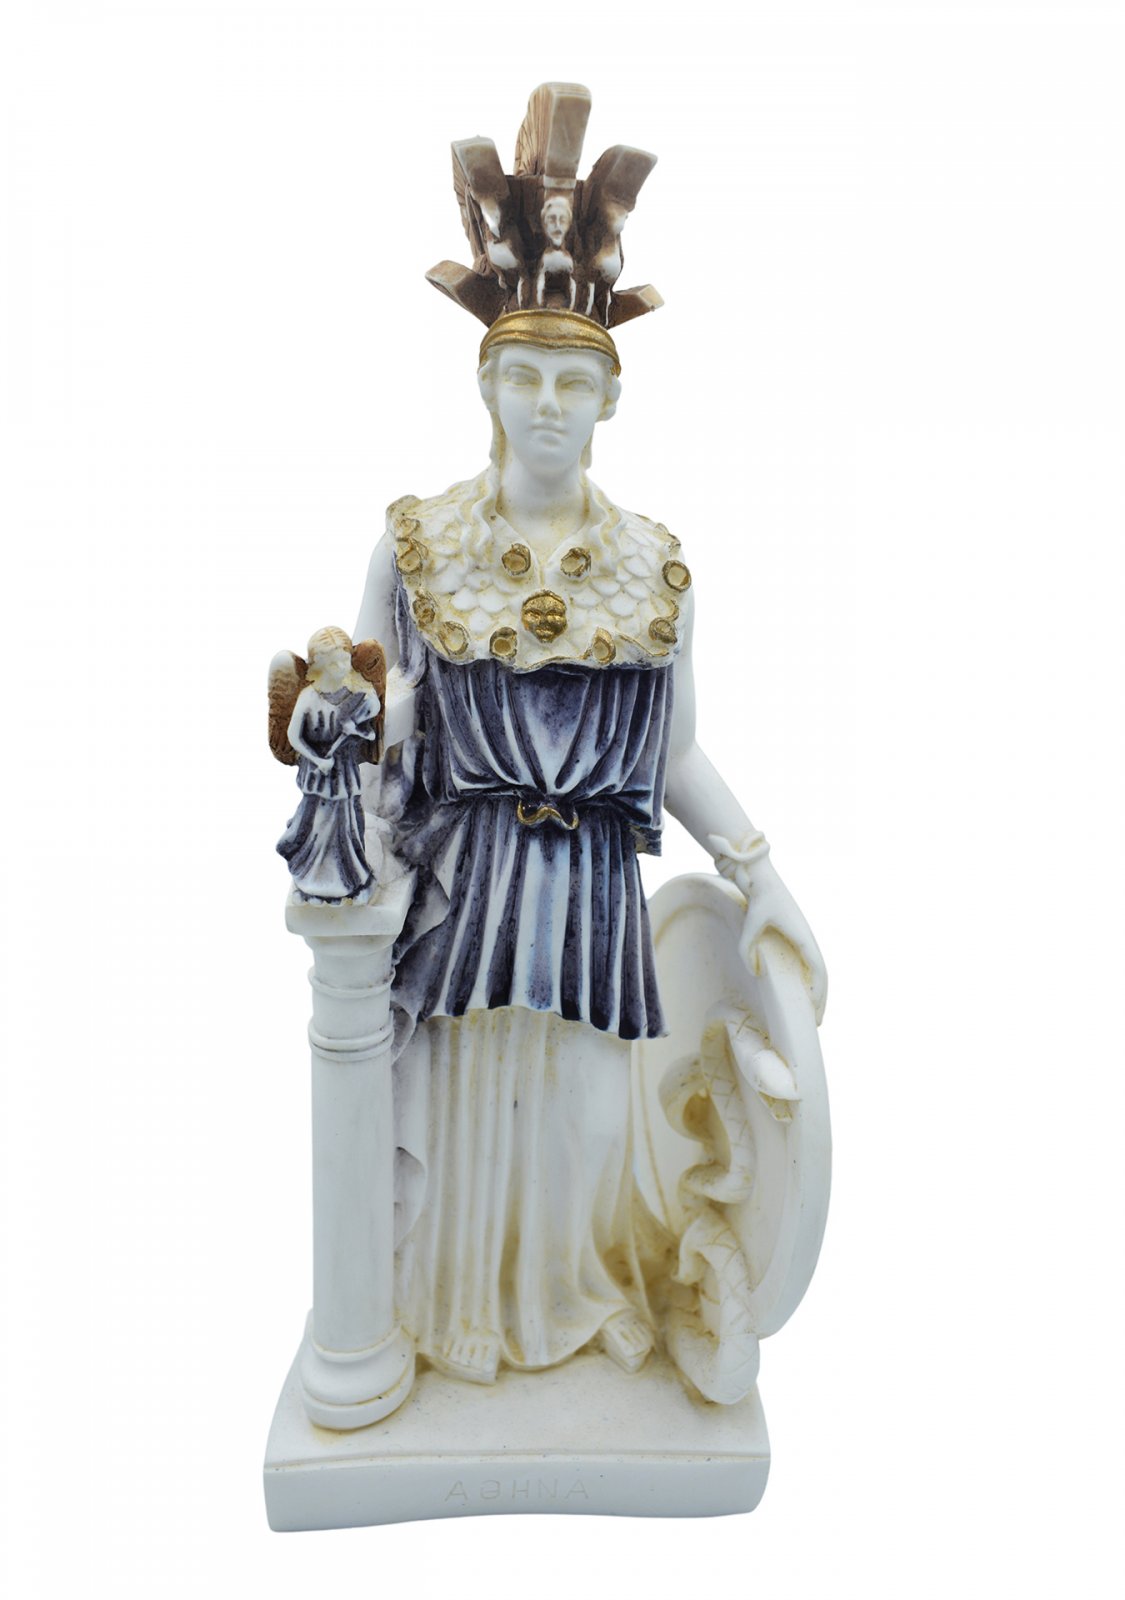 Athena Pallas, Greek goddess of wisdom, alabaster statue with color and patina